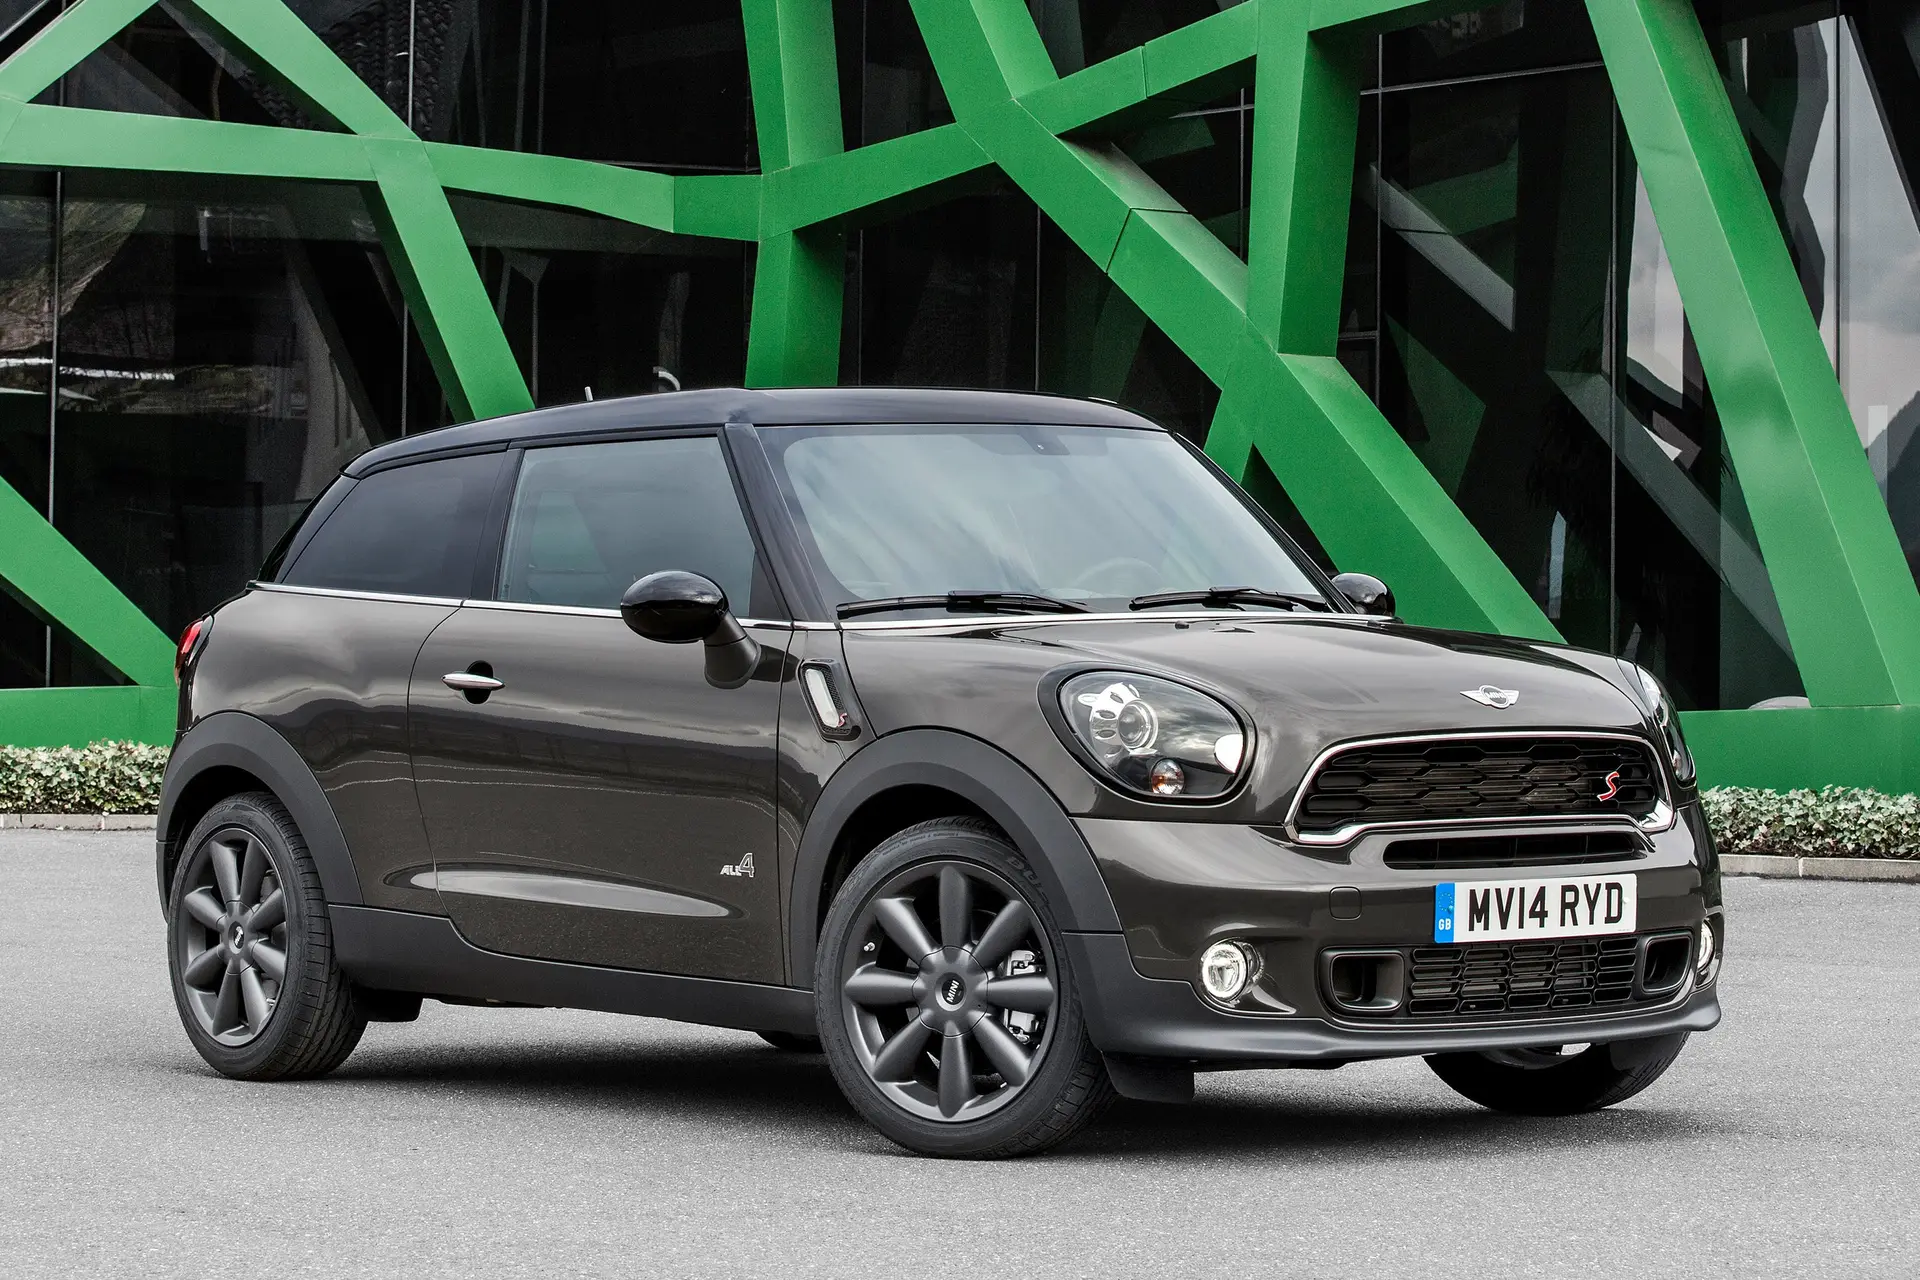 MINI Paceman (2013-2016) Review: exterior front three quarter photo of the MINI Paceman